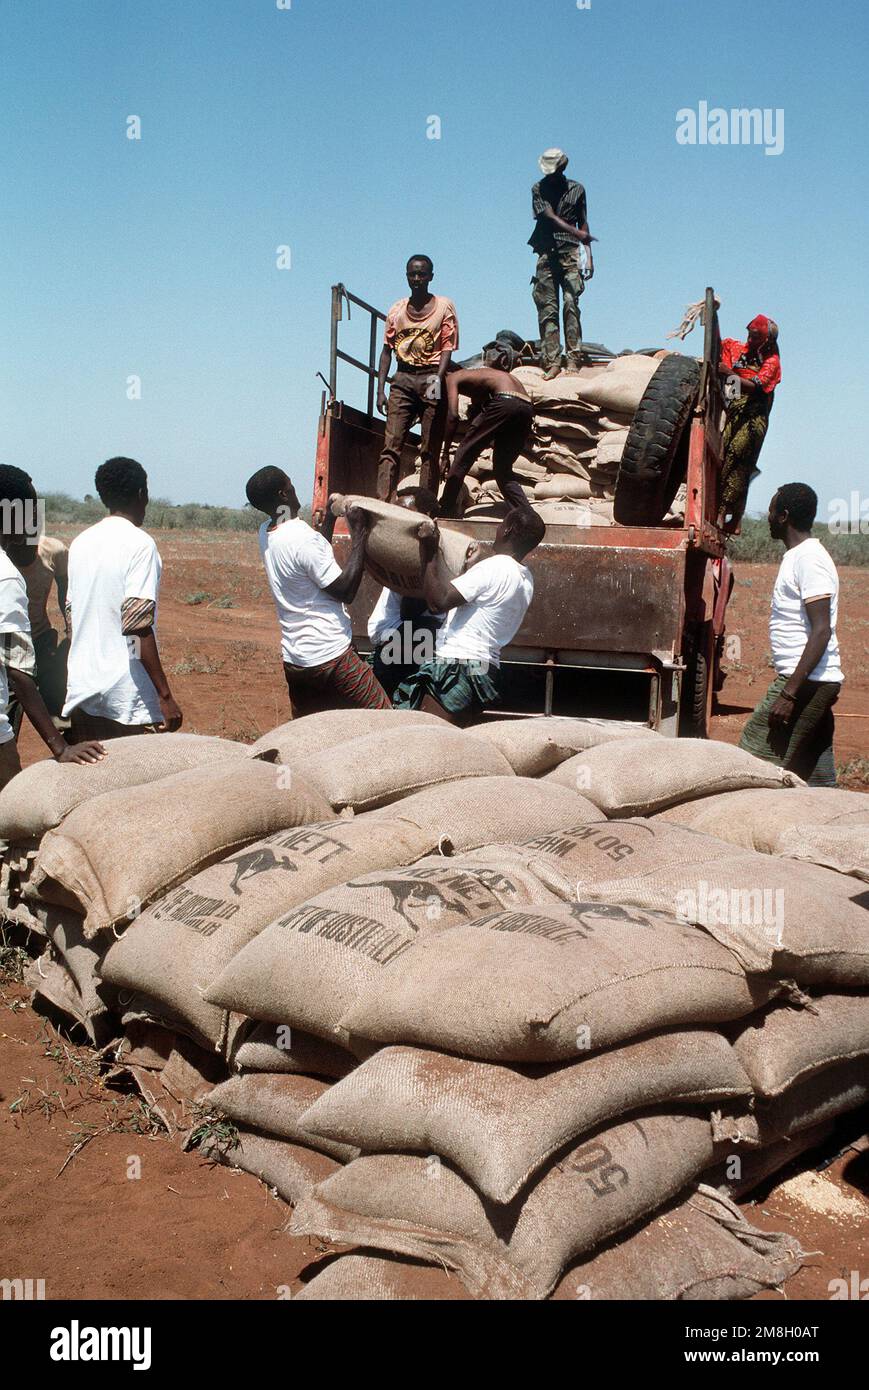 Men from the village of Maleel load bags of wheat onto a local truck during the multinational relief effort OPERATION RESTORE HOPE. The grain, donated by Australia, was flown in by Marine Heavy Helicopter Squadron 363 (HMH-363) instead of driven by truck convoy because it is suspected that the raods to the village have been mined. Subject Operation/Series: RESTORE HOPE Country: Somalia (SOM) Stock Photo